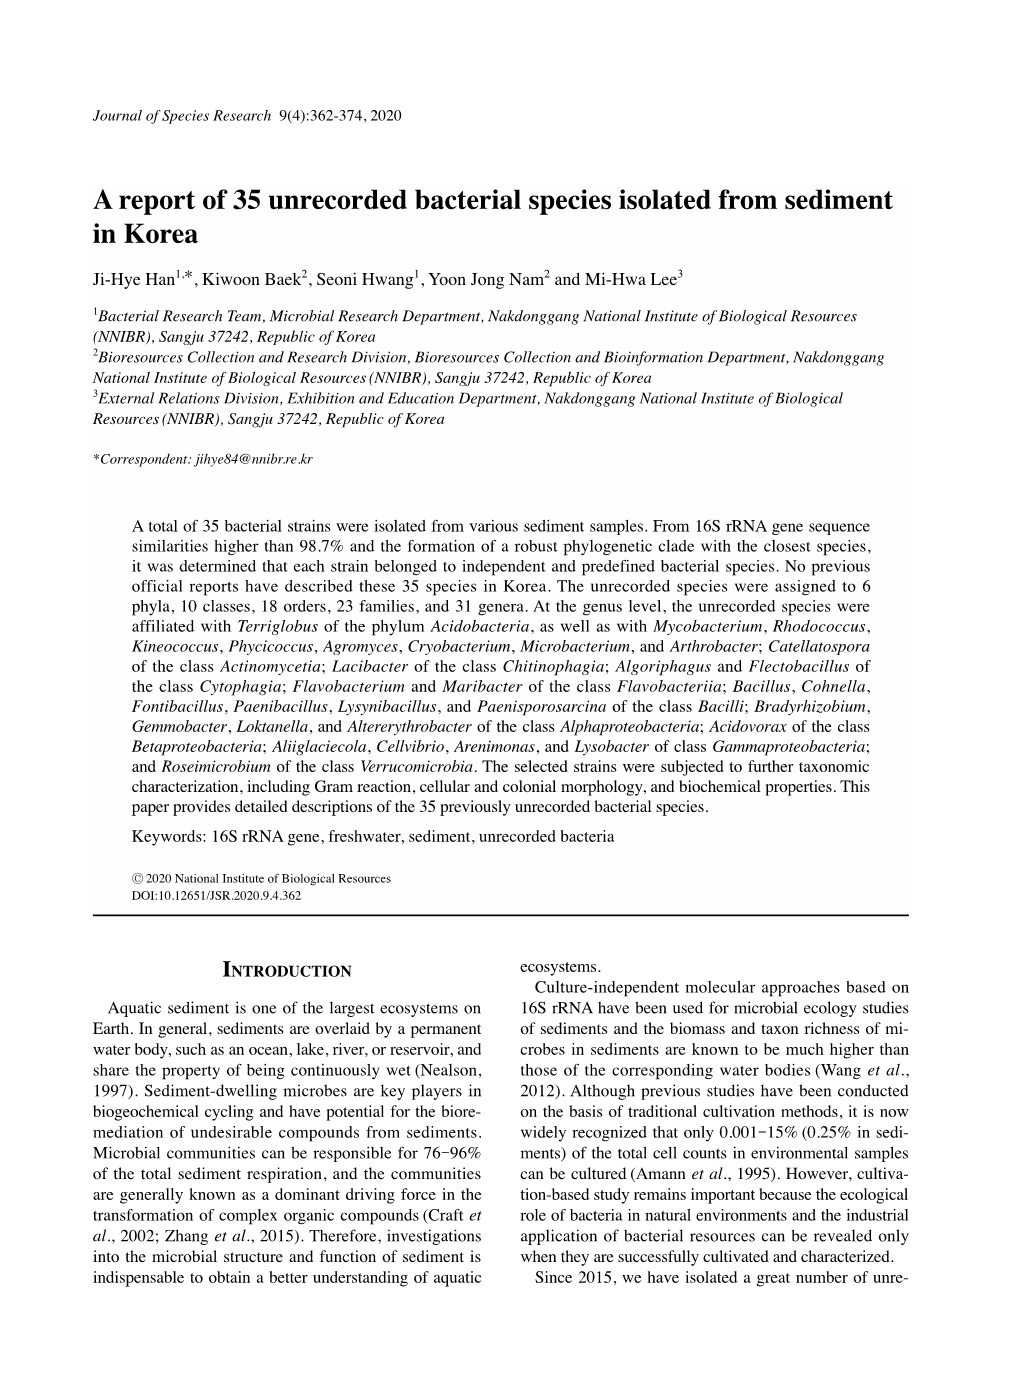 A Report of 35 Unrecorded Bacterial Species Isolated from Sediment in Korea